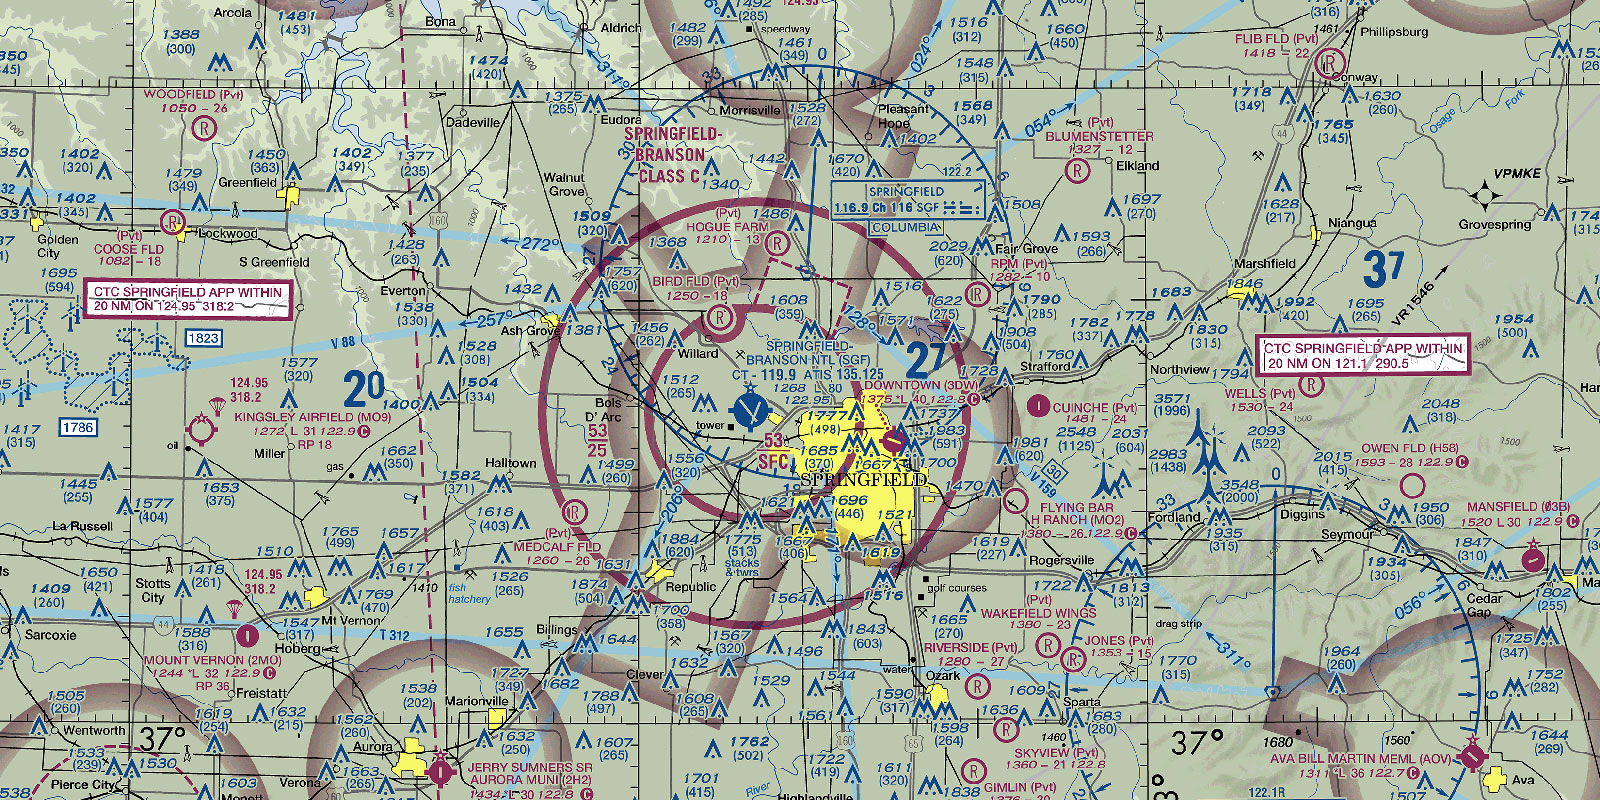 Part of an aeronautical chart shows the air traffic control regions in and around Springfield's airspace.